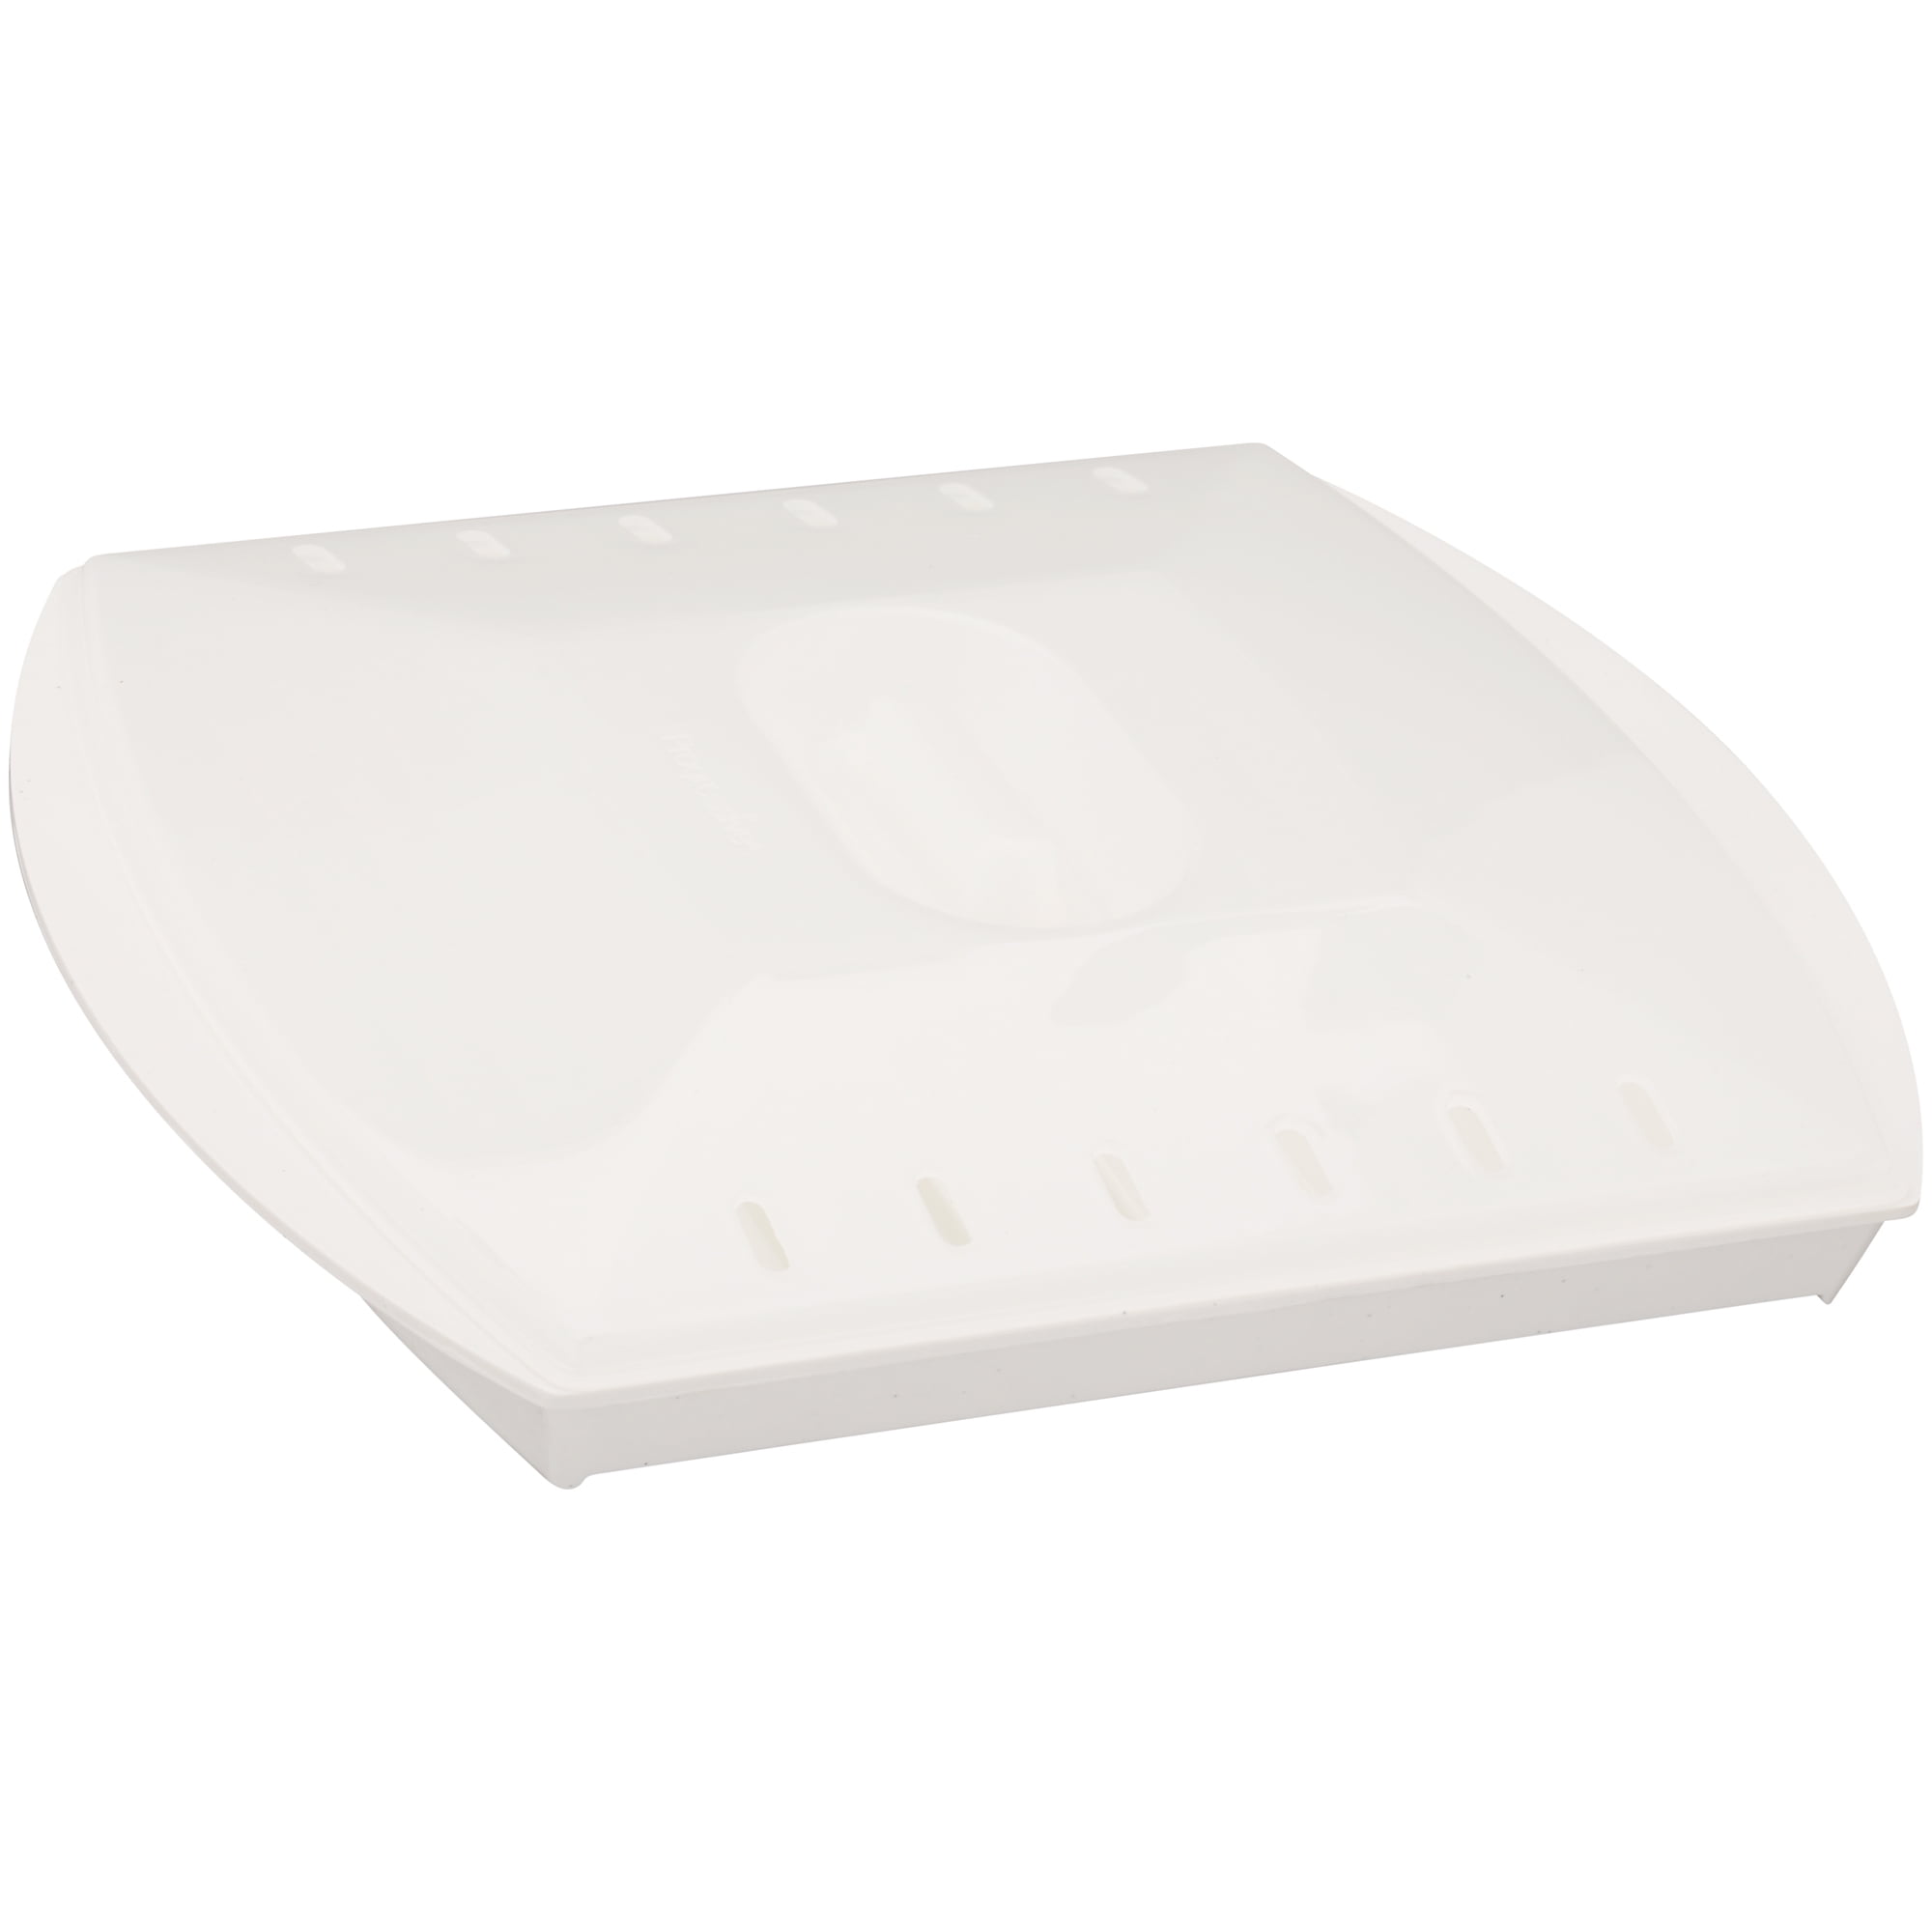 Progressive Microwave Bacon Grill with Cover, White